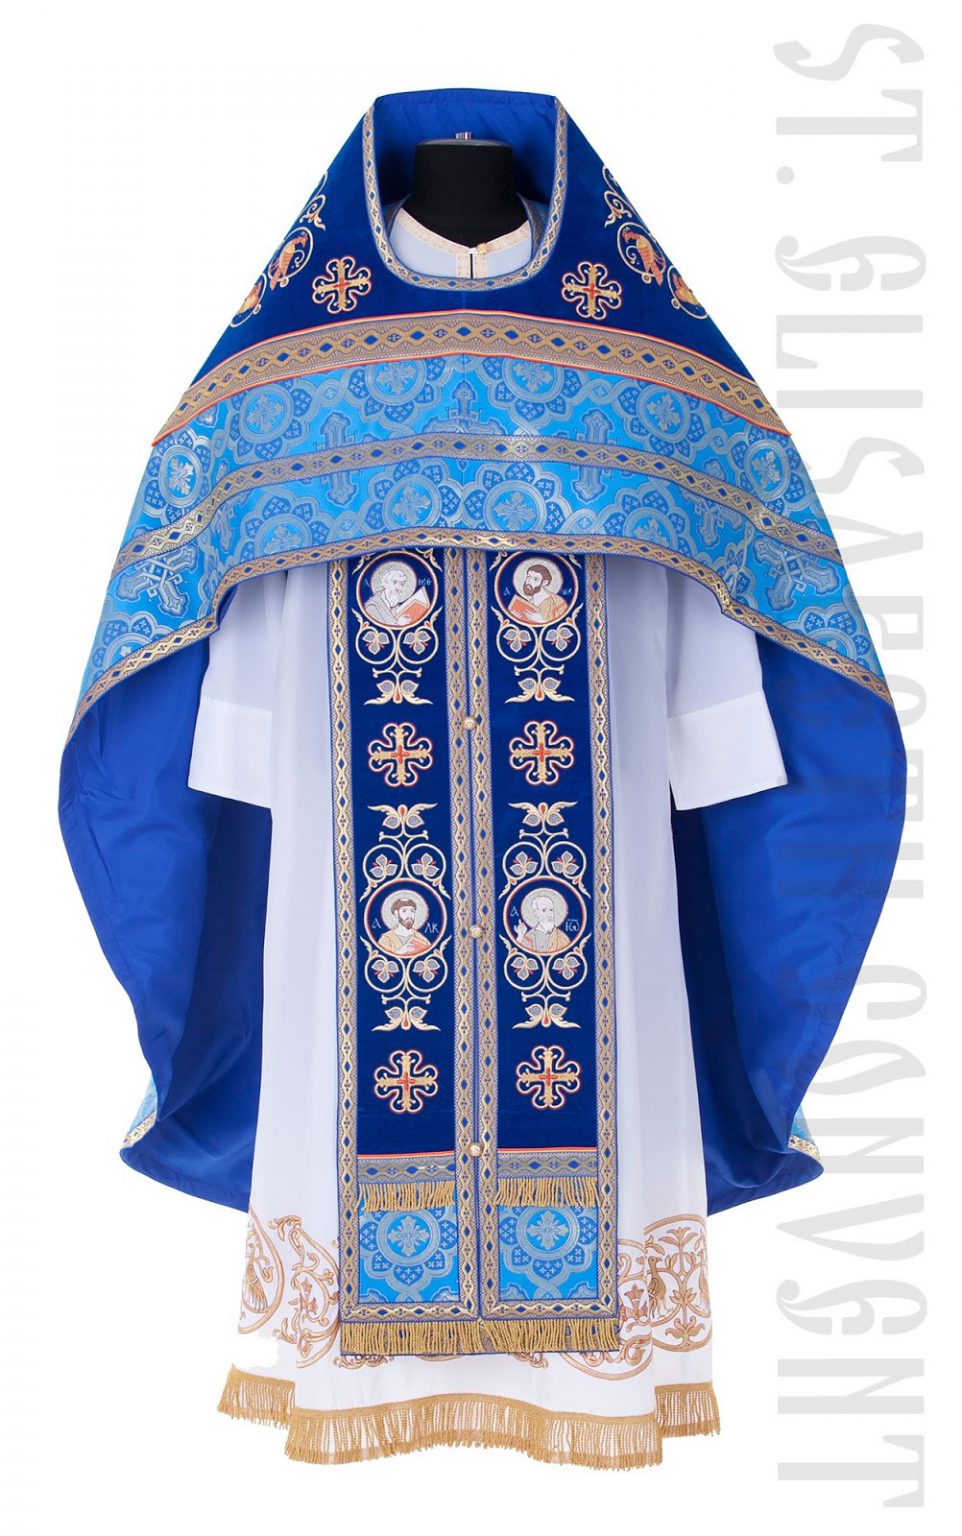 A Guide To Liturgical Colors In The Orthodox Church » Saint John the